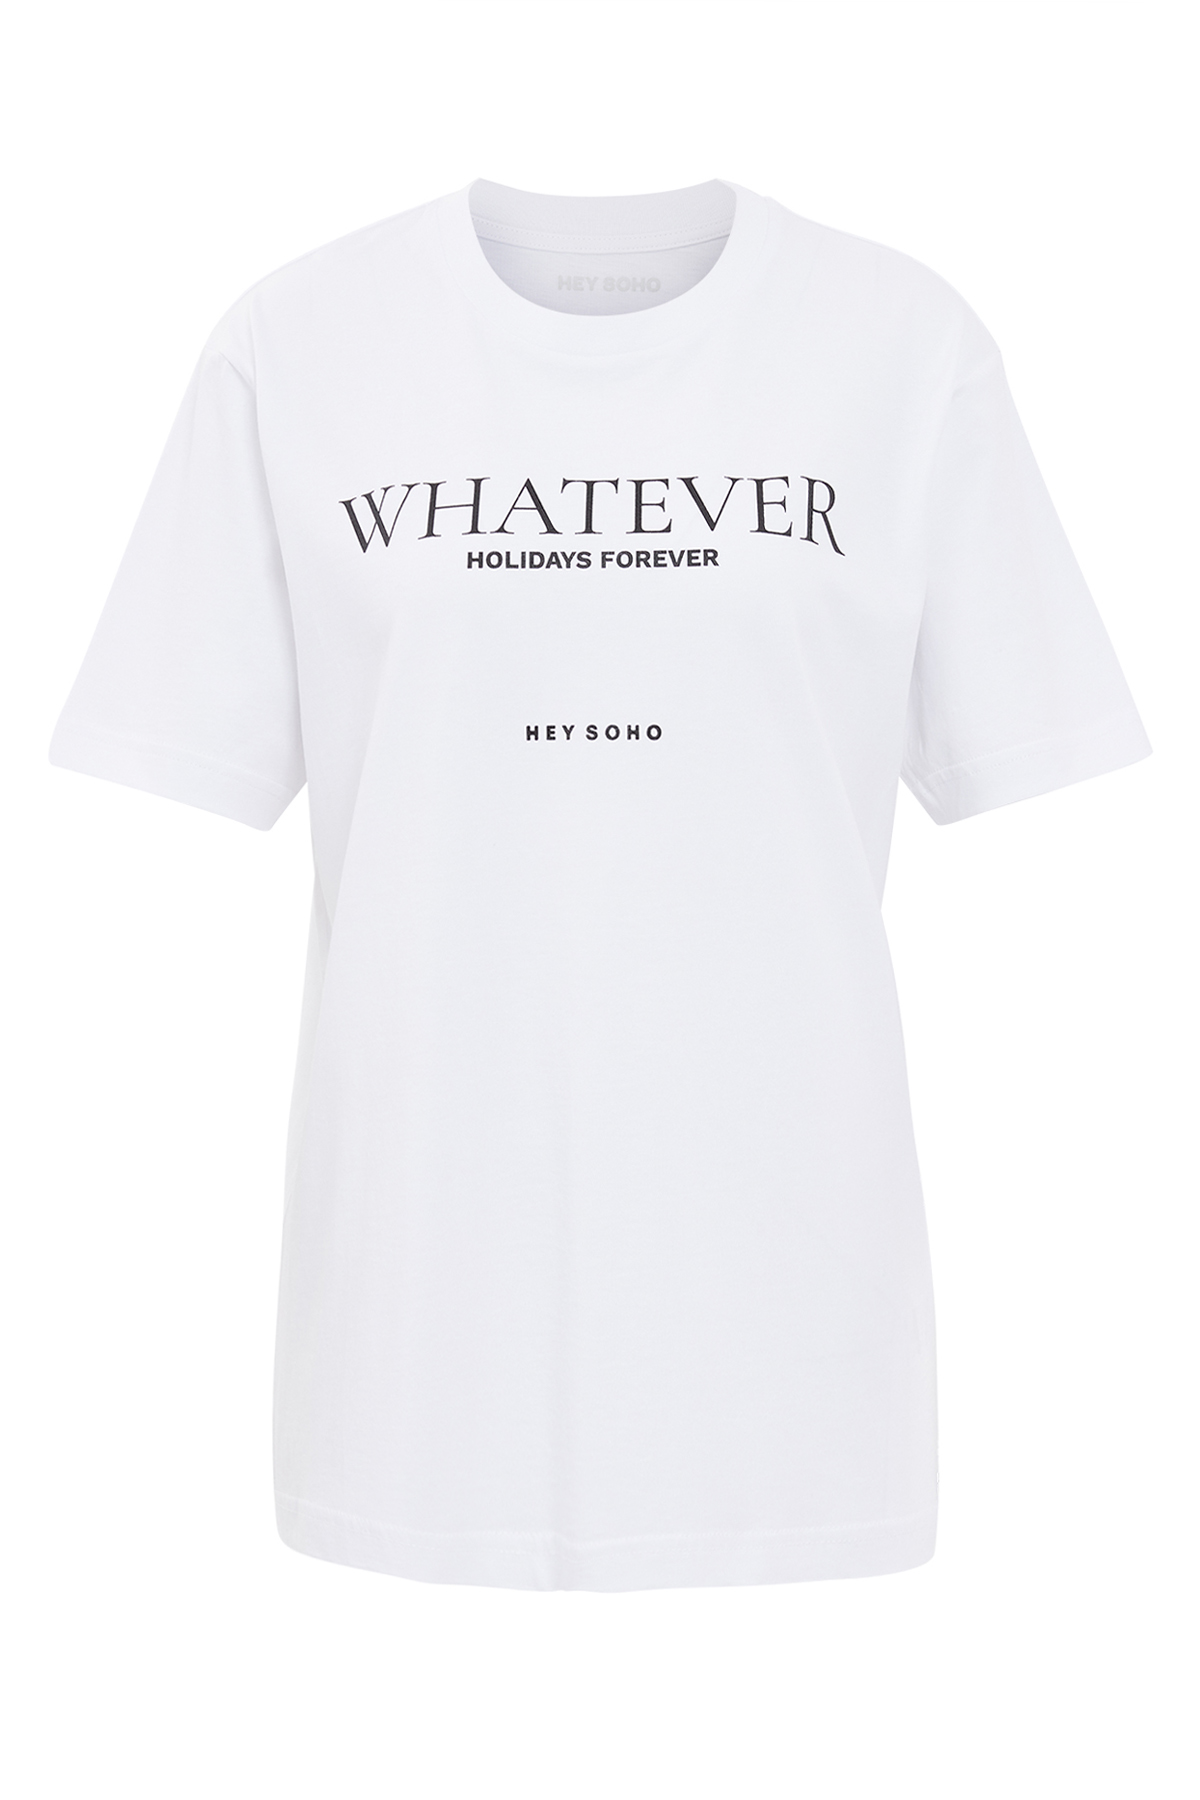 T-Shirt Whatever Holidays Forever